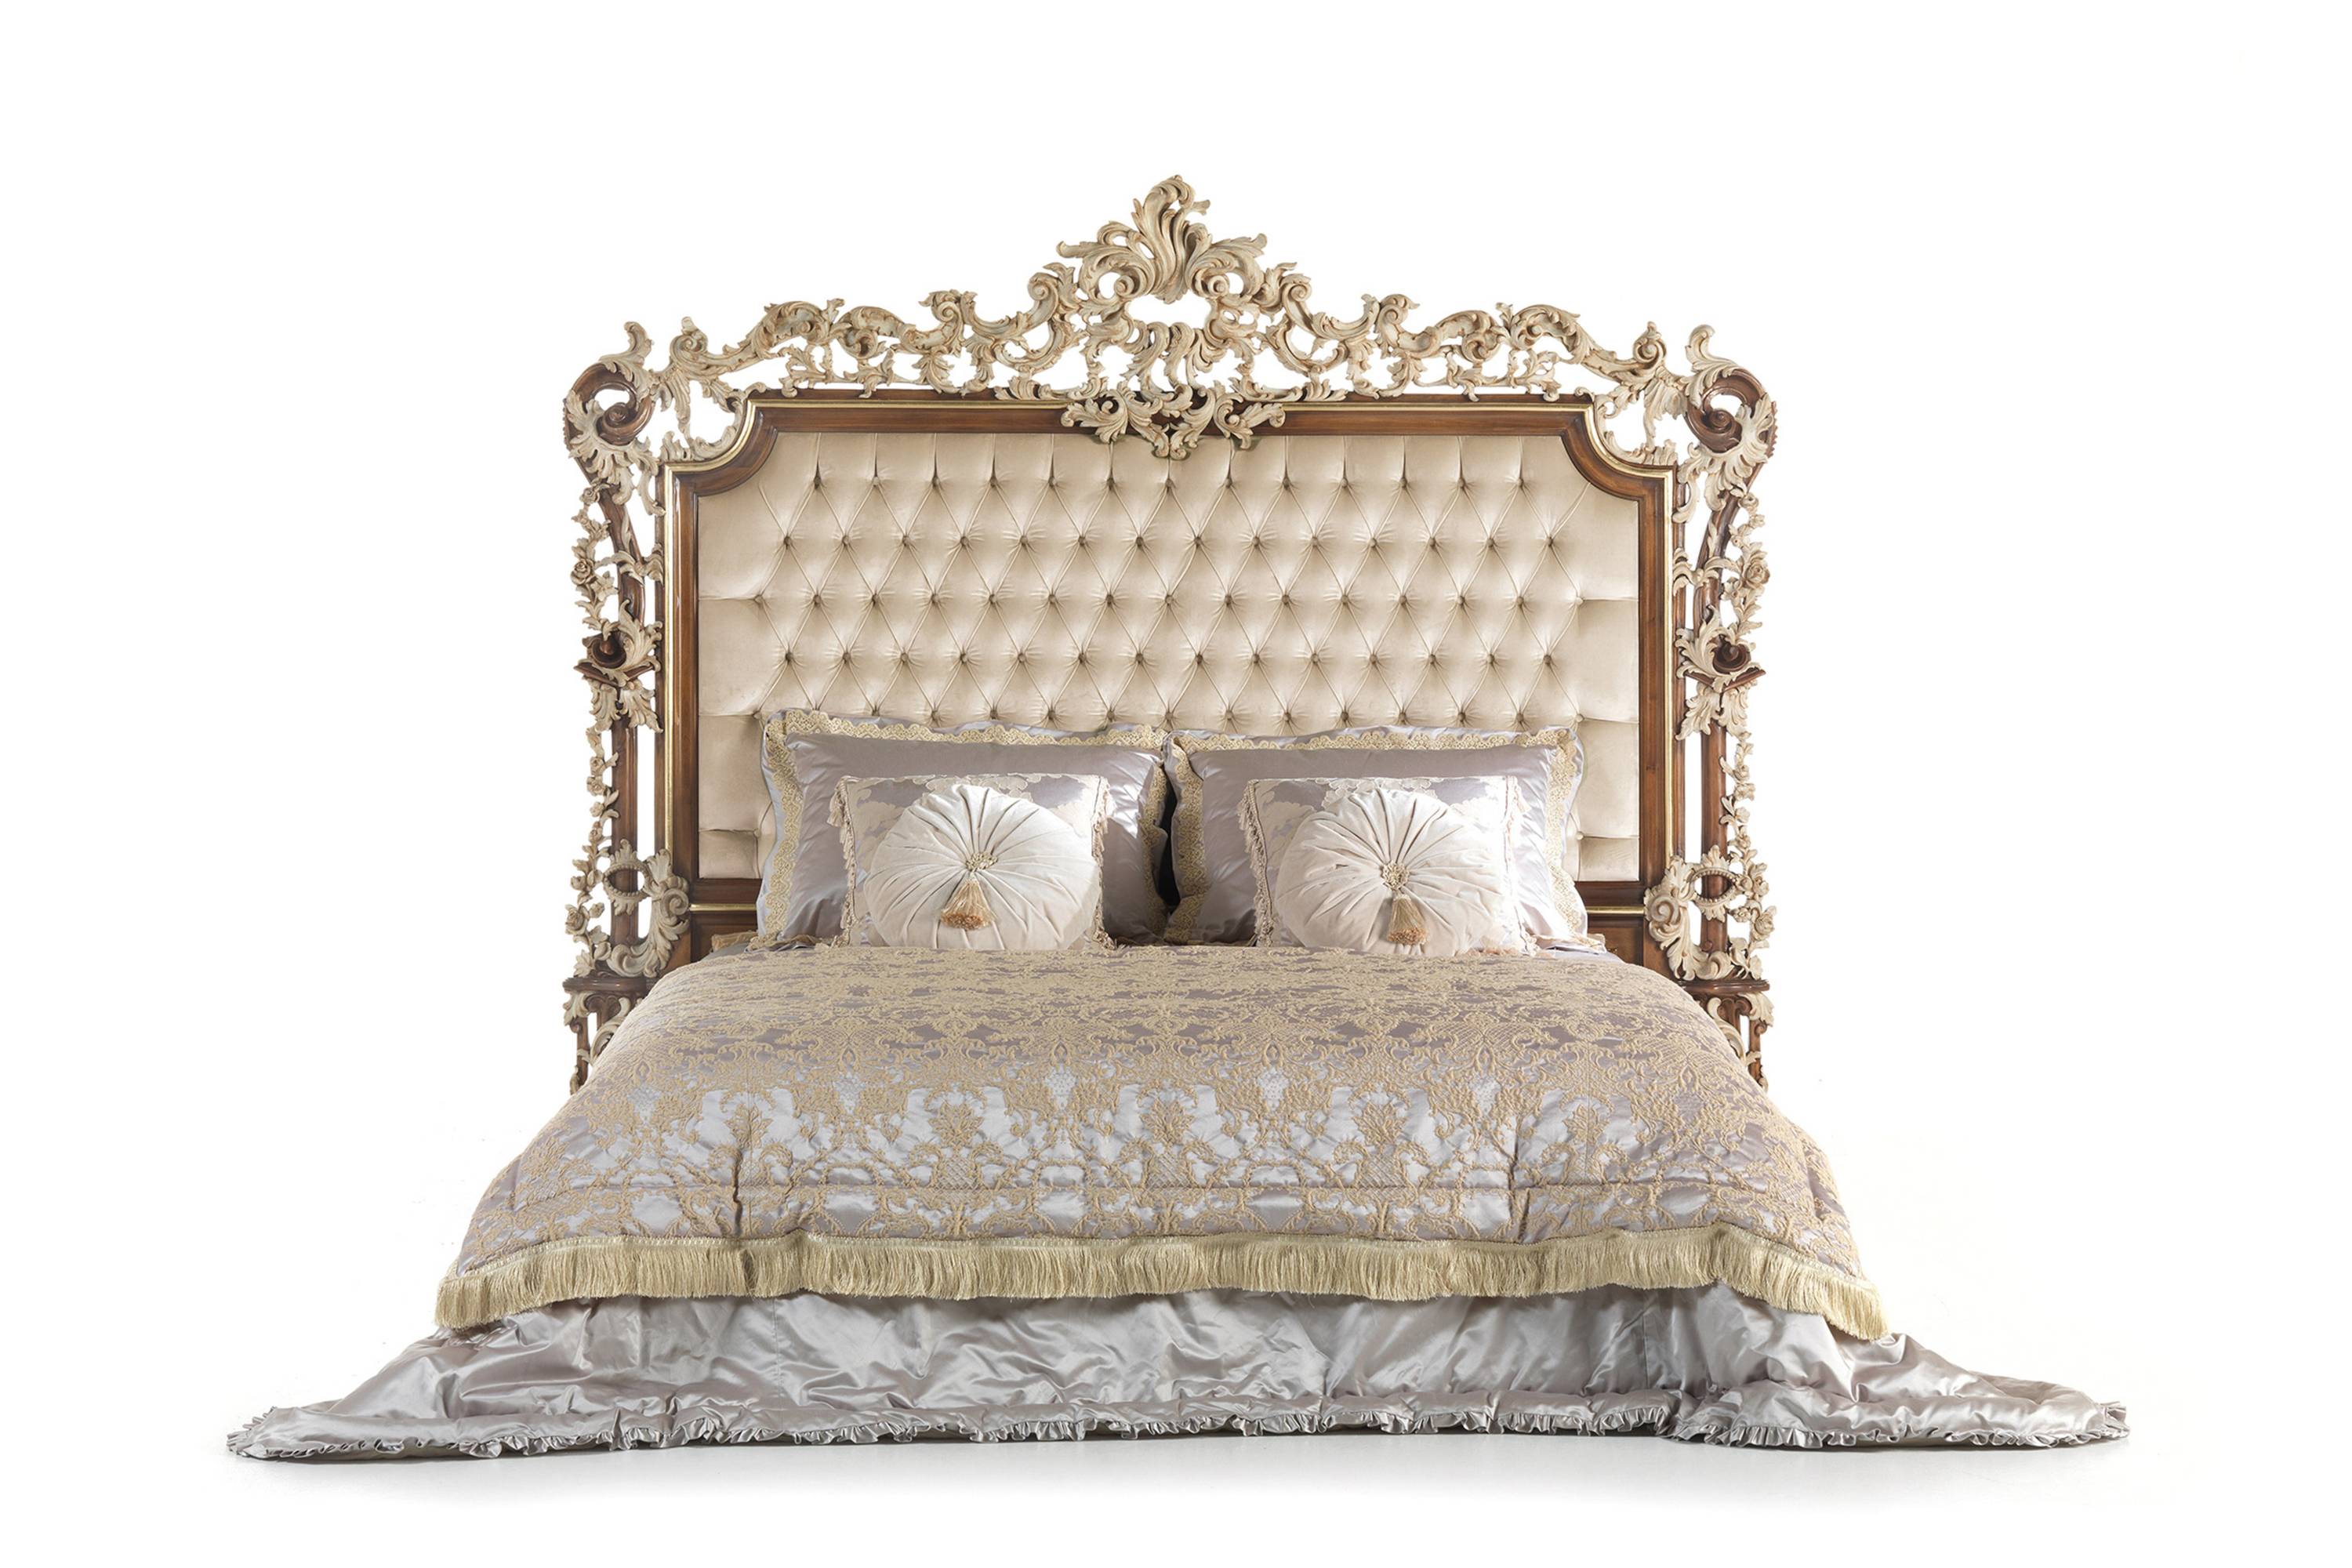 LA GRANDE DAME bed - Bespoke projects with luxury Made in Italy classic furniture